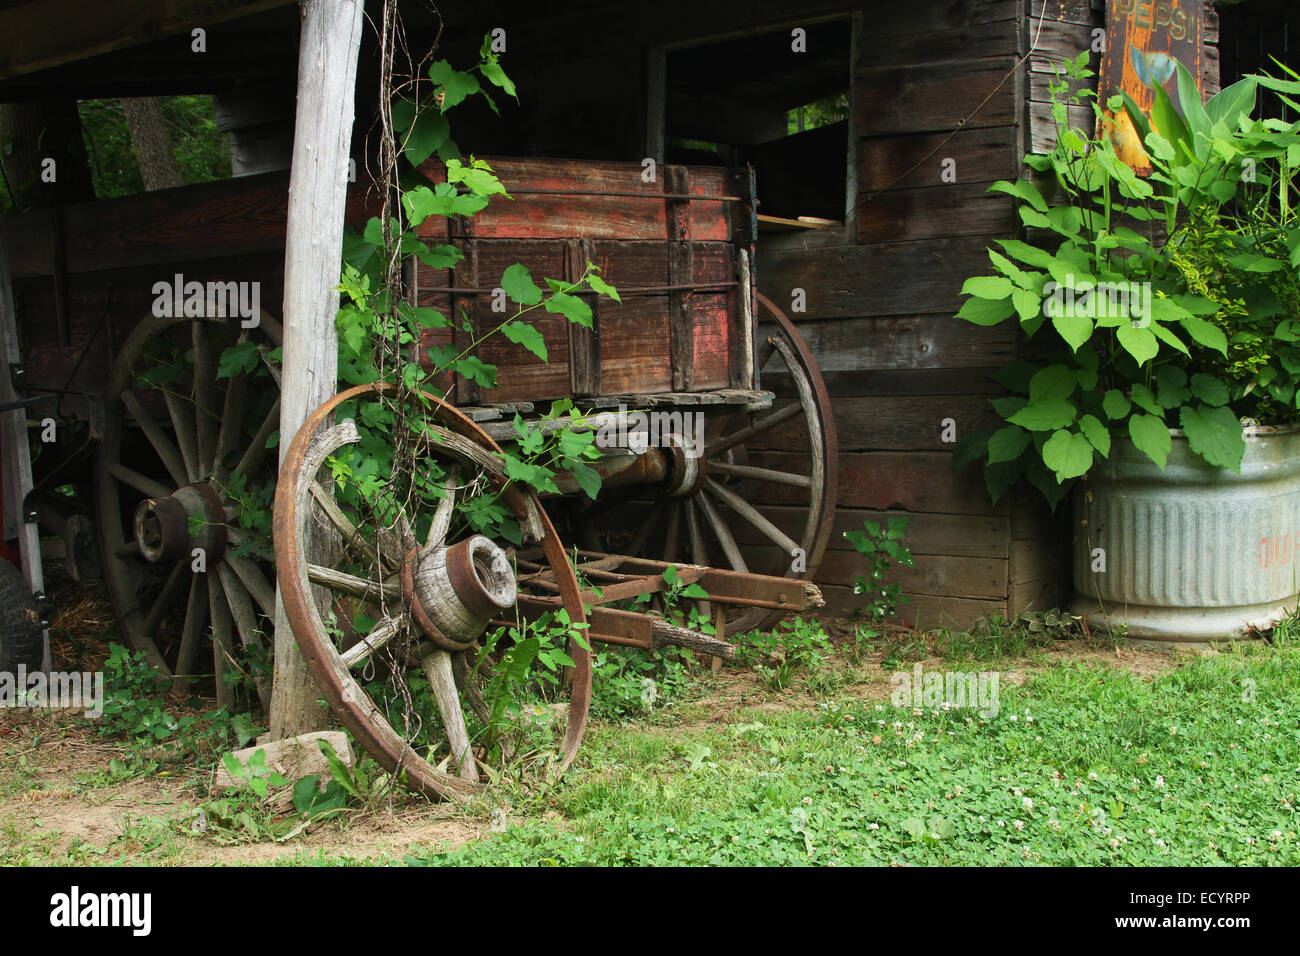 Old shed and old wagon. Rabbit Hash, Kentucky, USA. Circa 1813. A historic small town on the Ohio River. Added to the National R Stock Photo